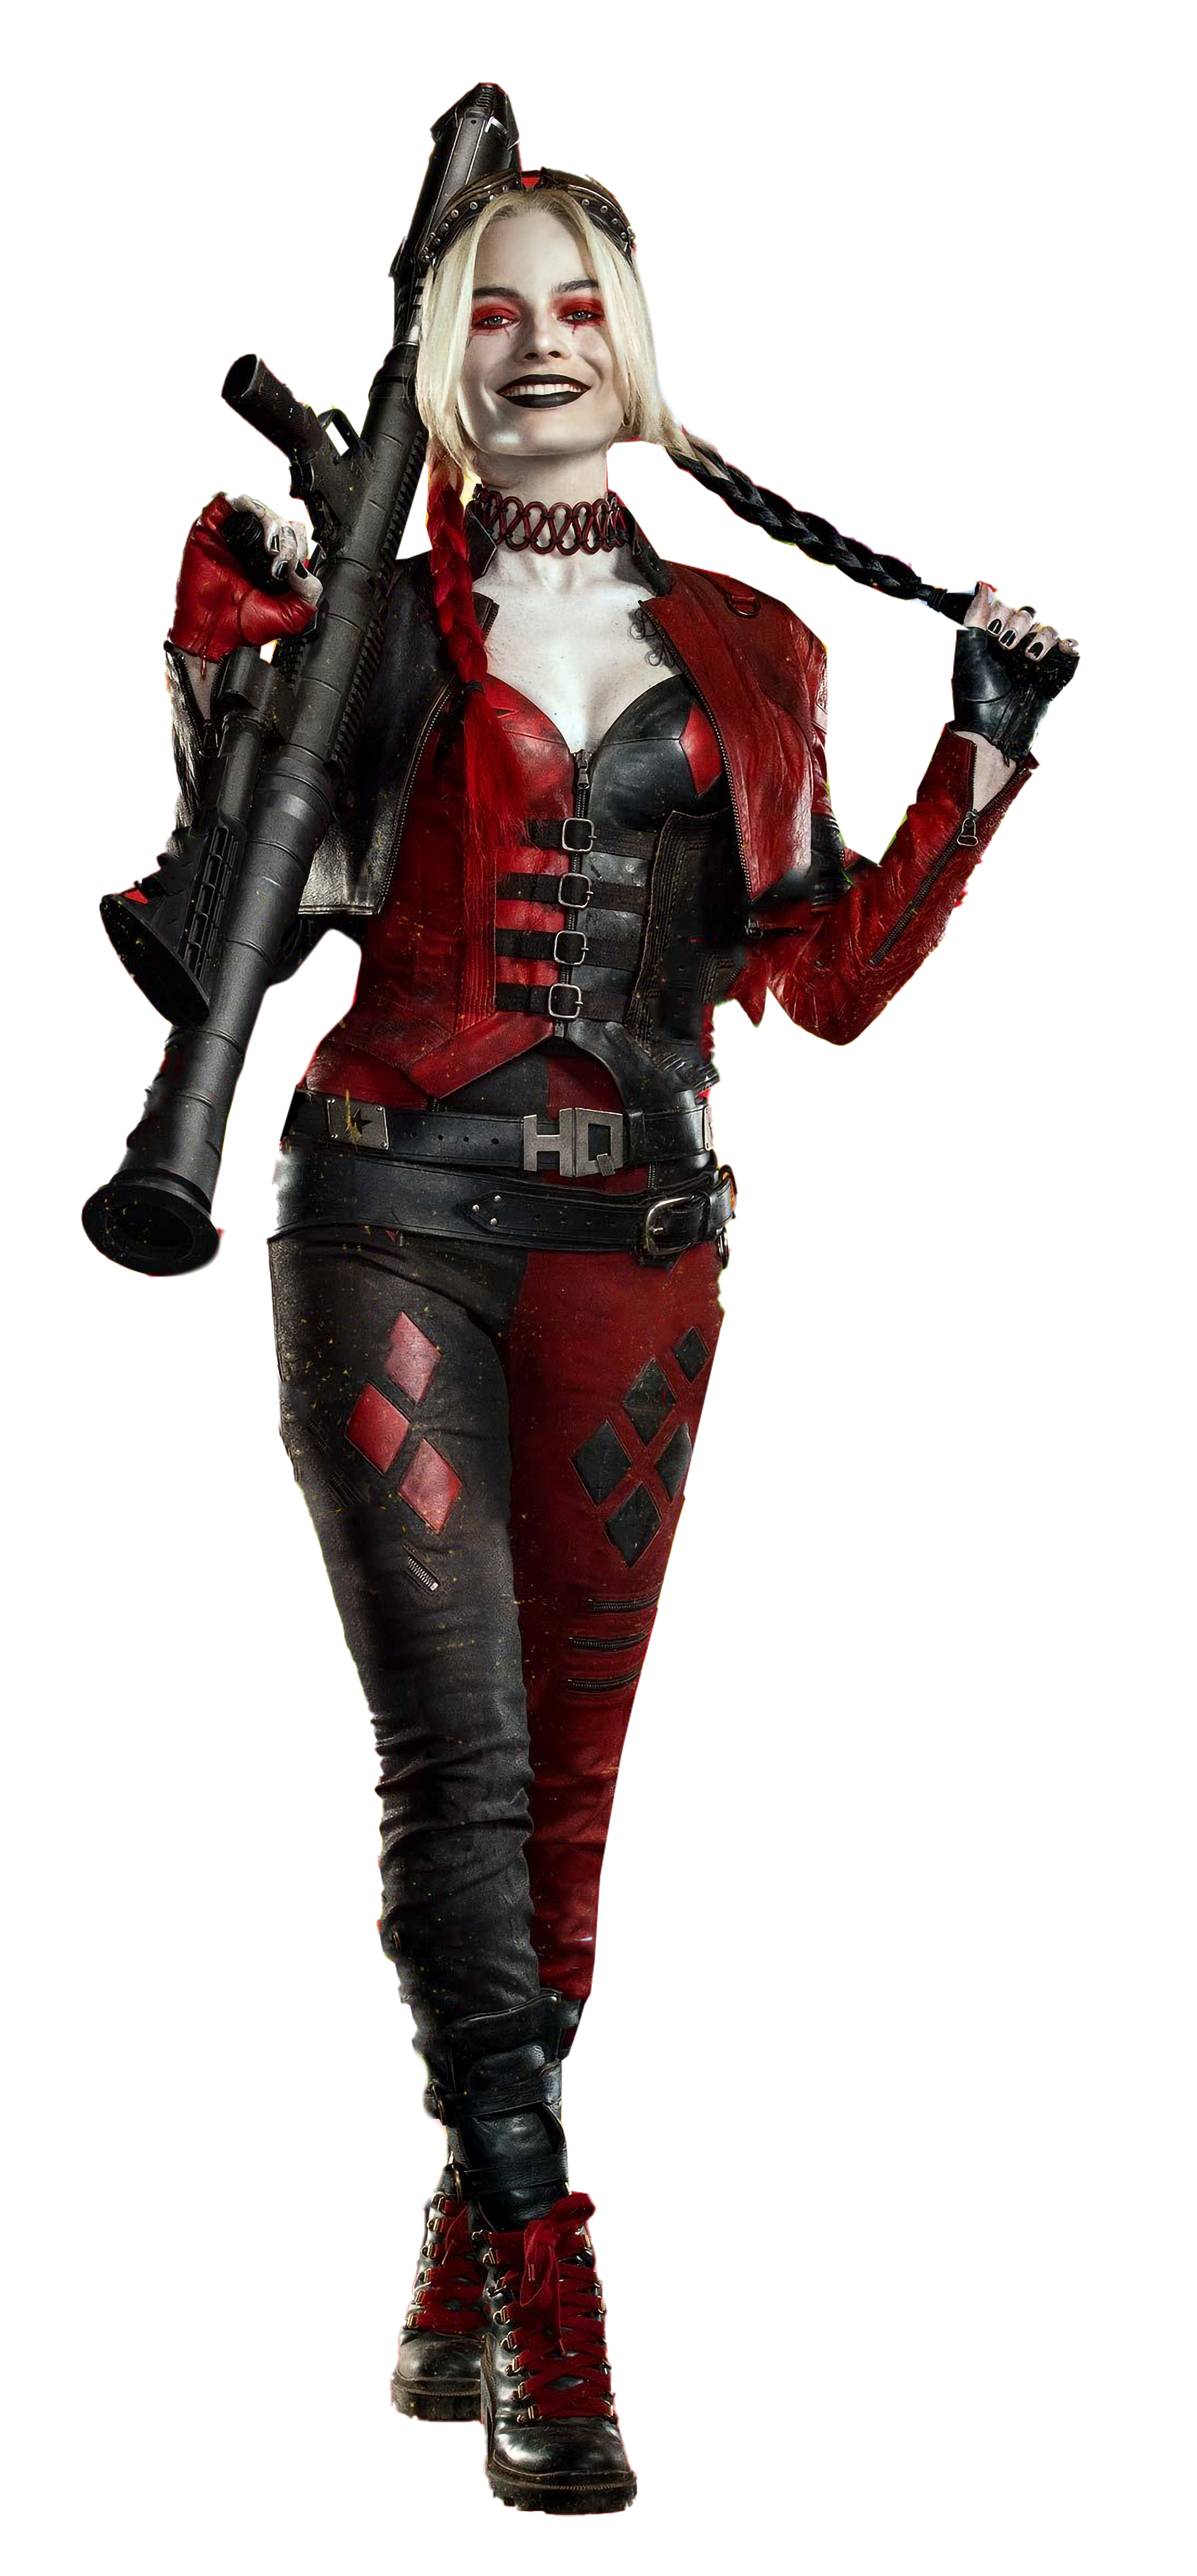 Harley Quinn: The Suicide Squad PNG by IWasBoredSoIDidThis on DeviantArt